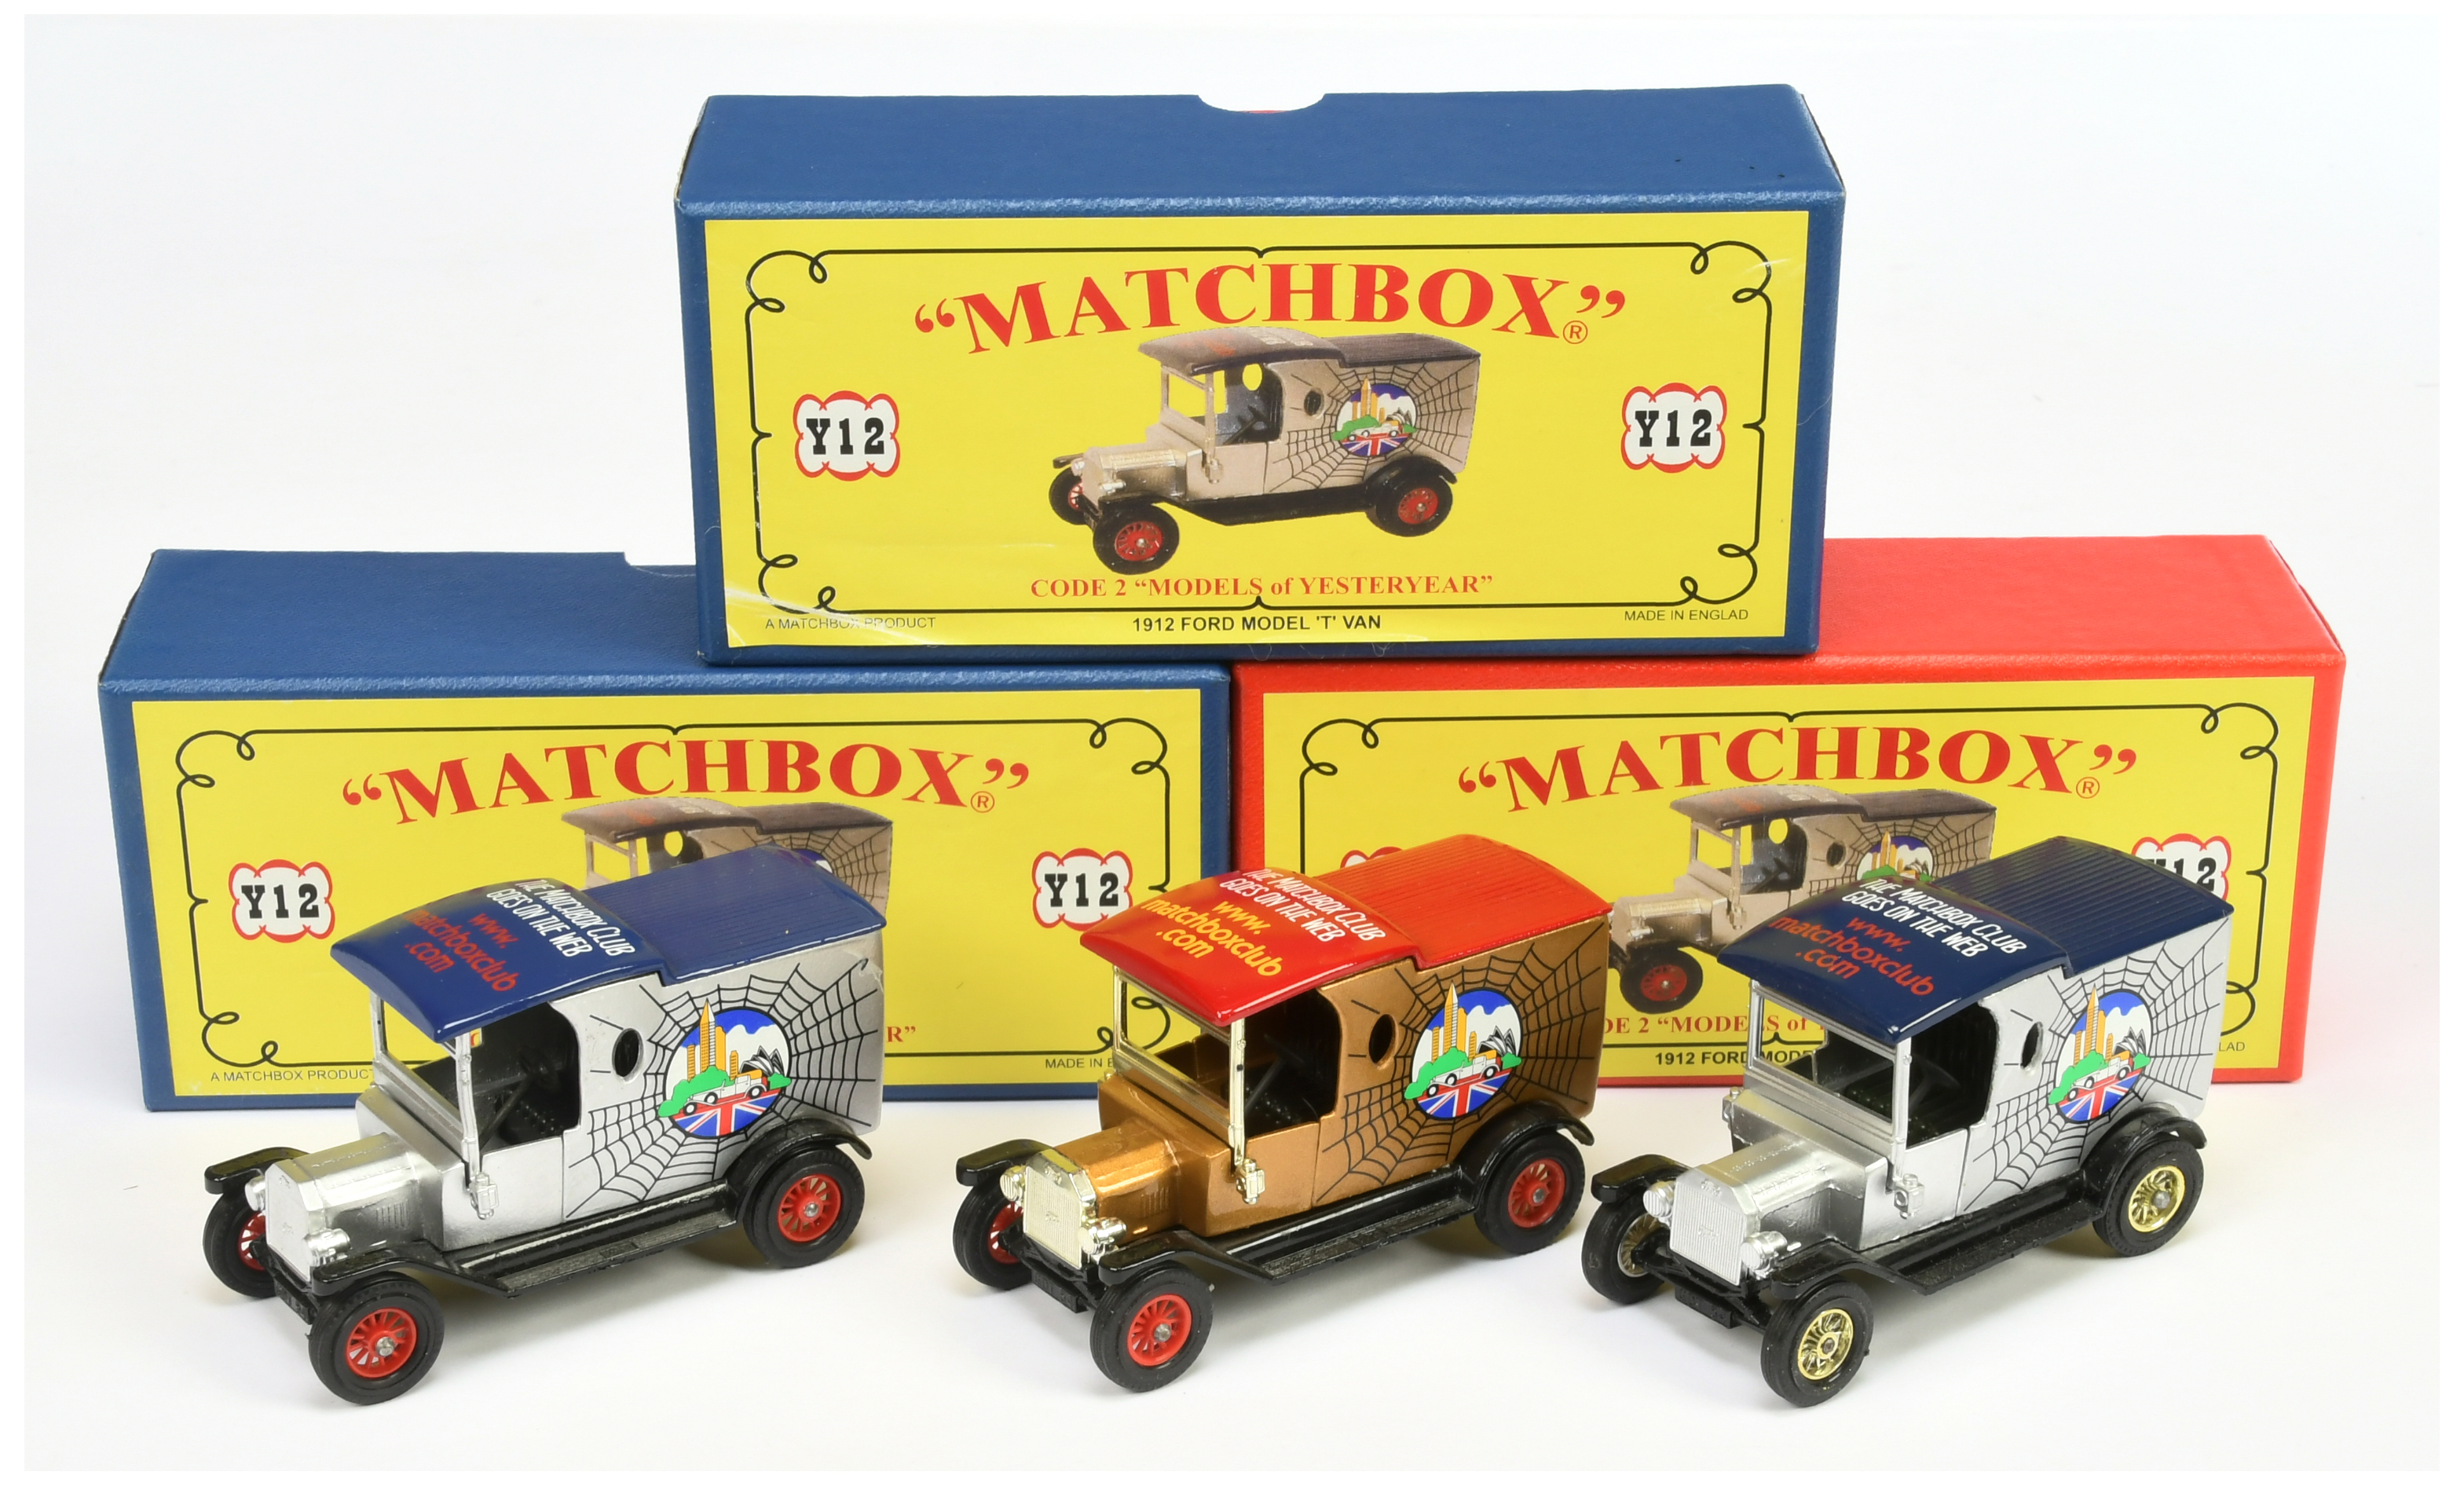 Matchbox Models of Yesteryear Code 2 issues (1) Y12 1912 Ford Model T Van "The Matchbox Club Goes...